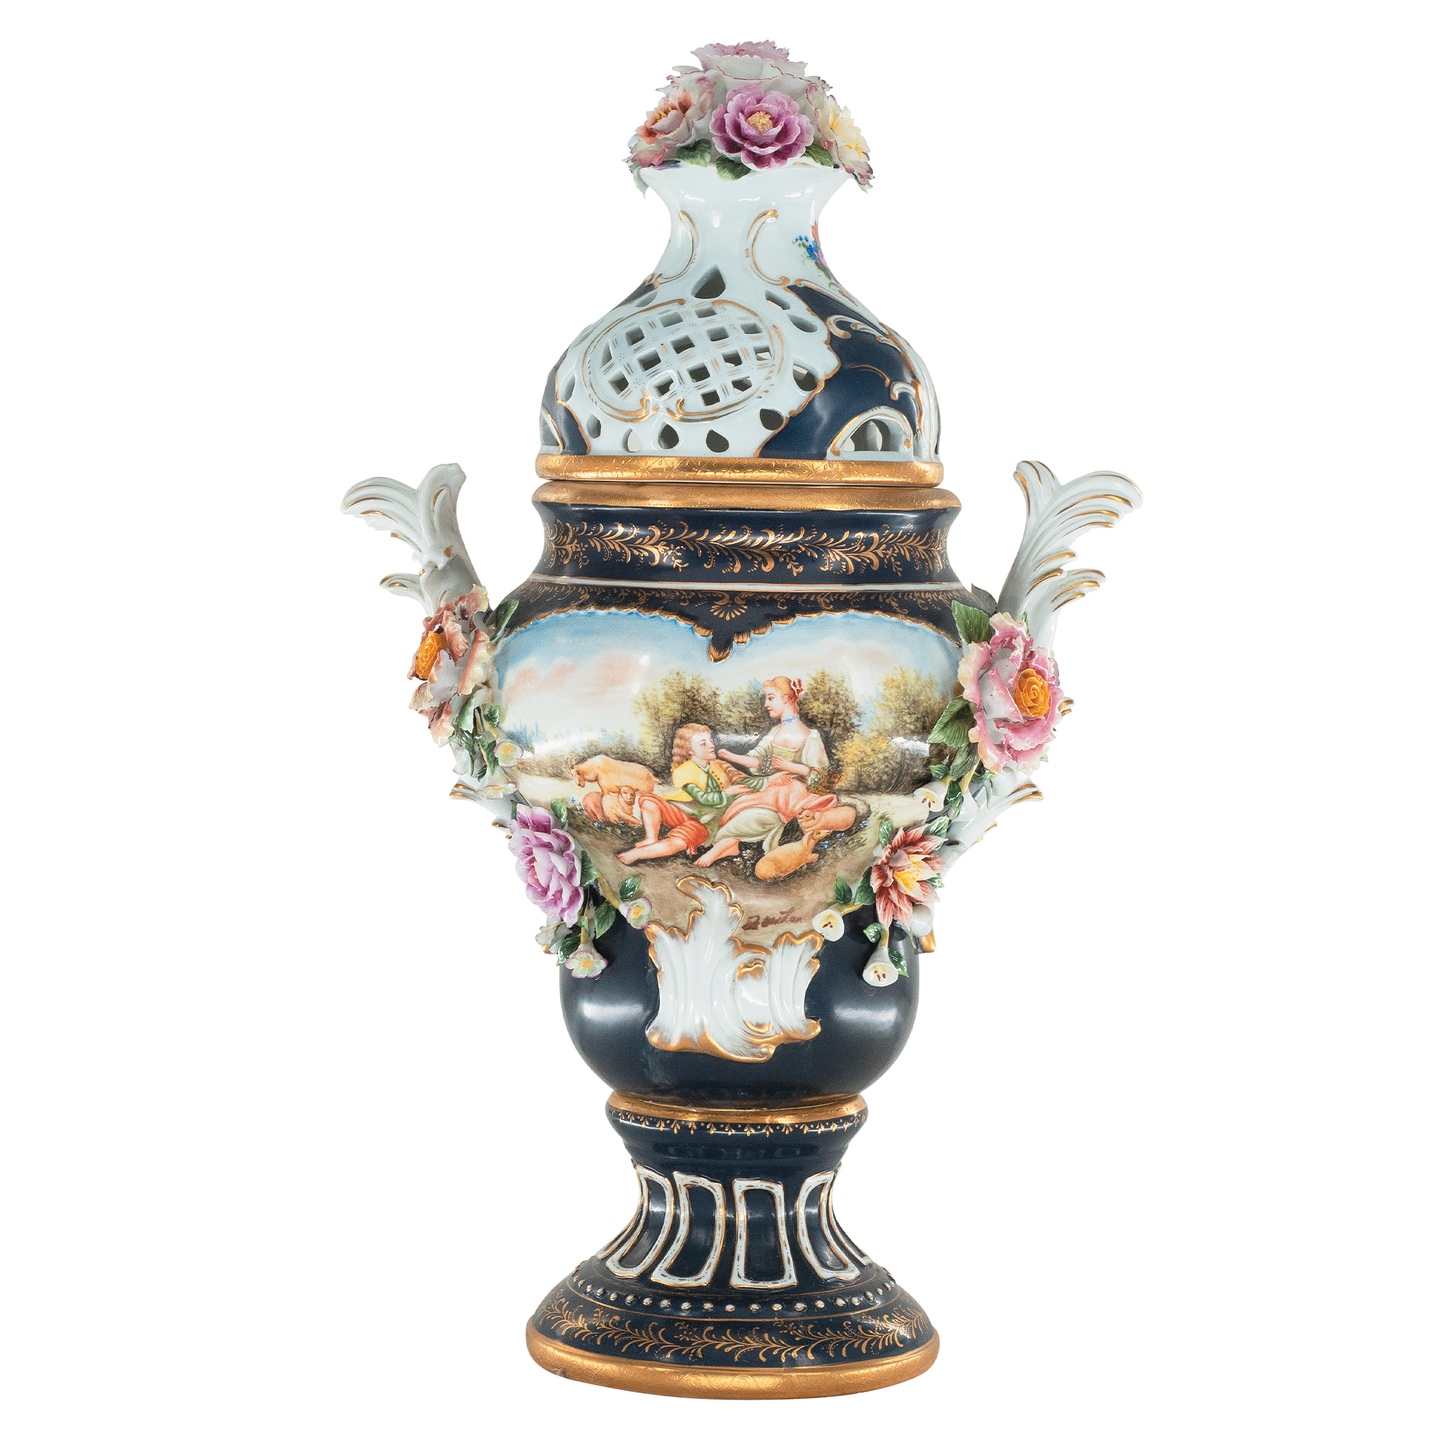 Hand-painted Potpourri Vase with Rococo Motif and Porcelain Flowers